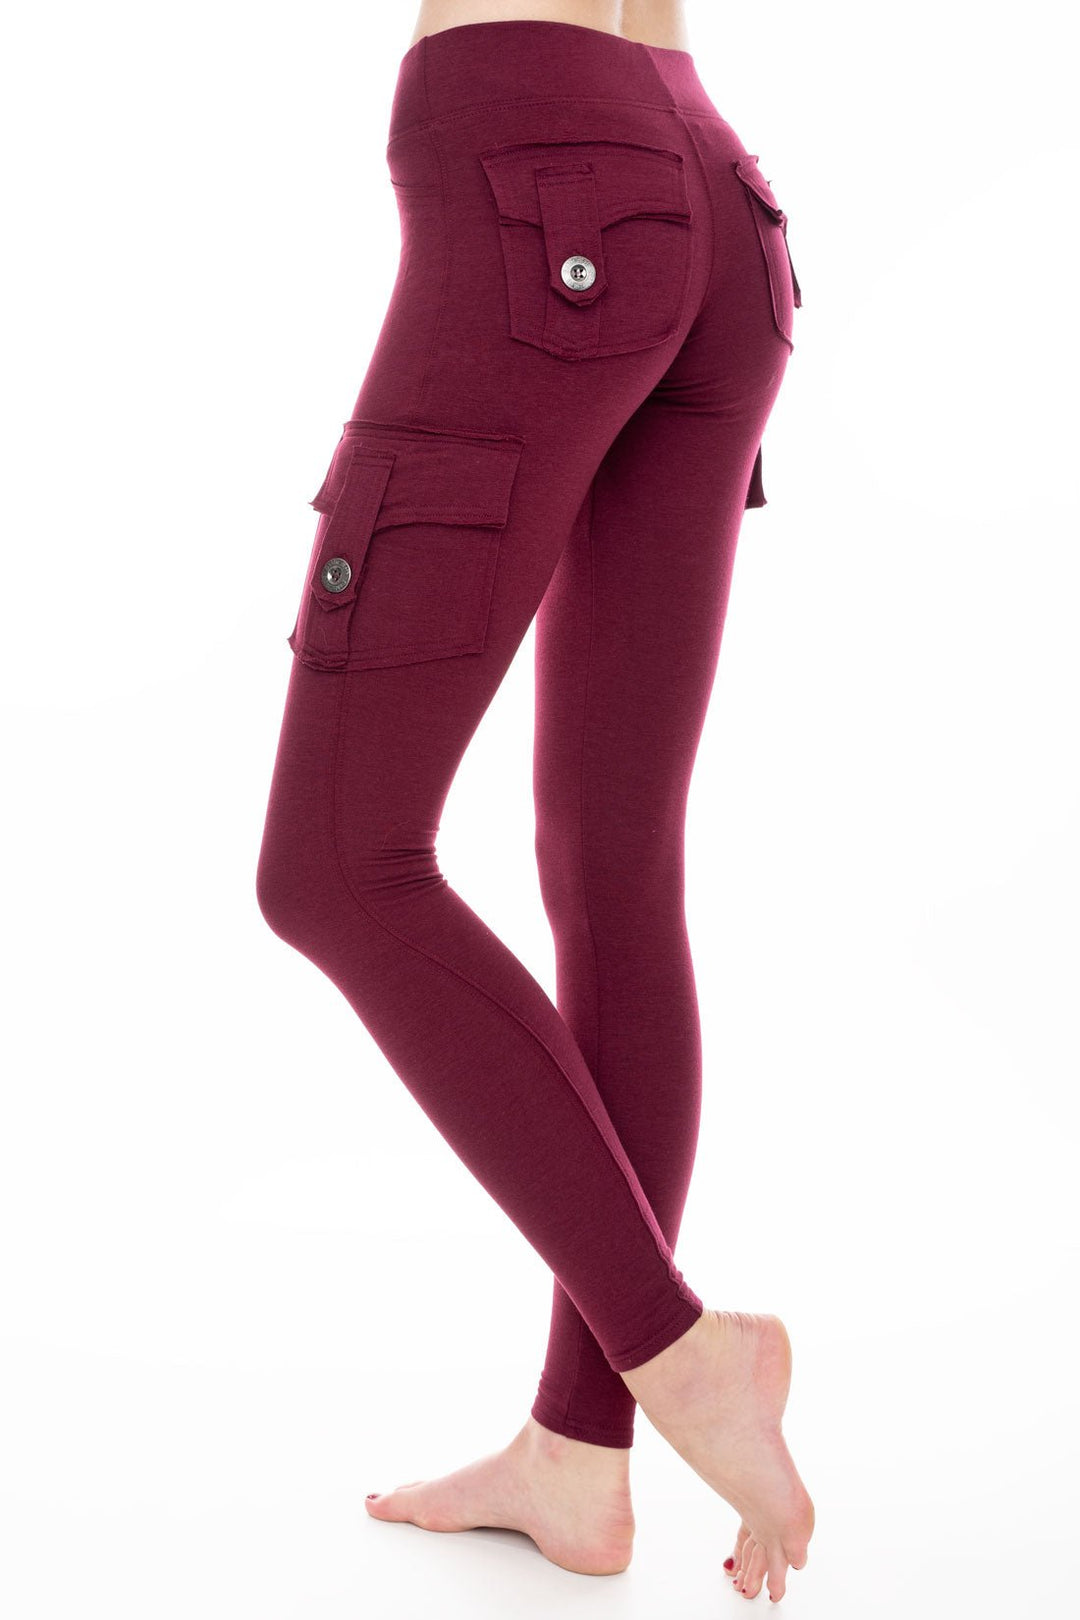 Dark red pocket leggings with back pockets and side pockets ethically made from Tencel Lyocell and organic cotton